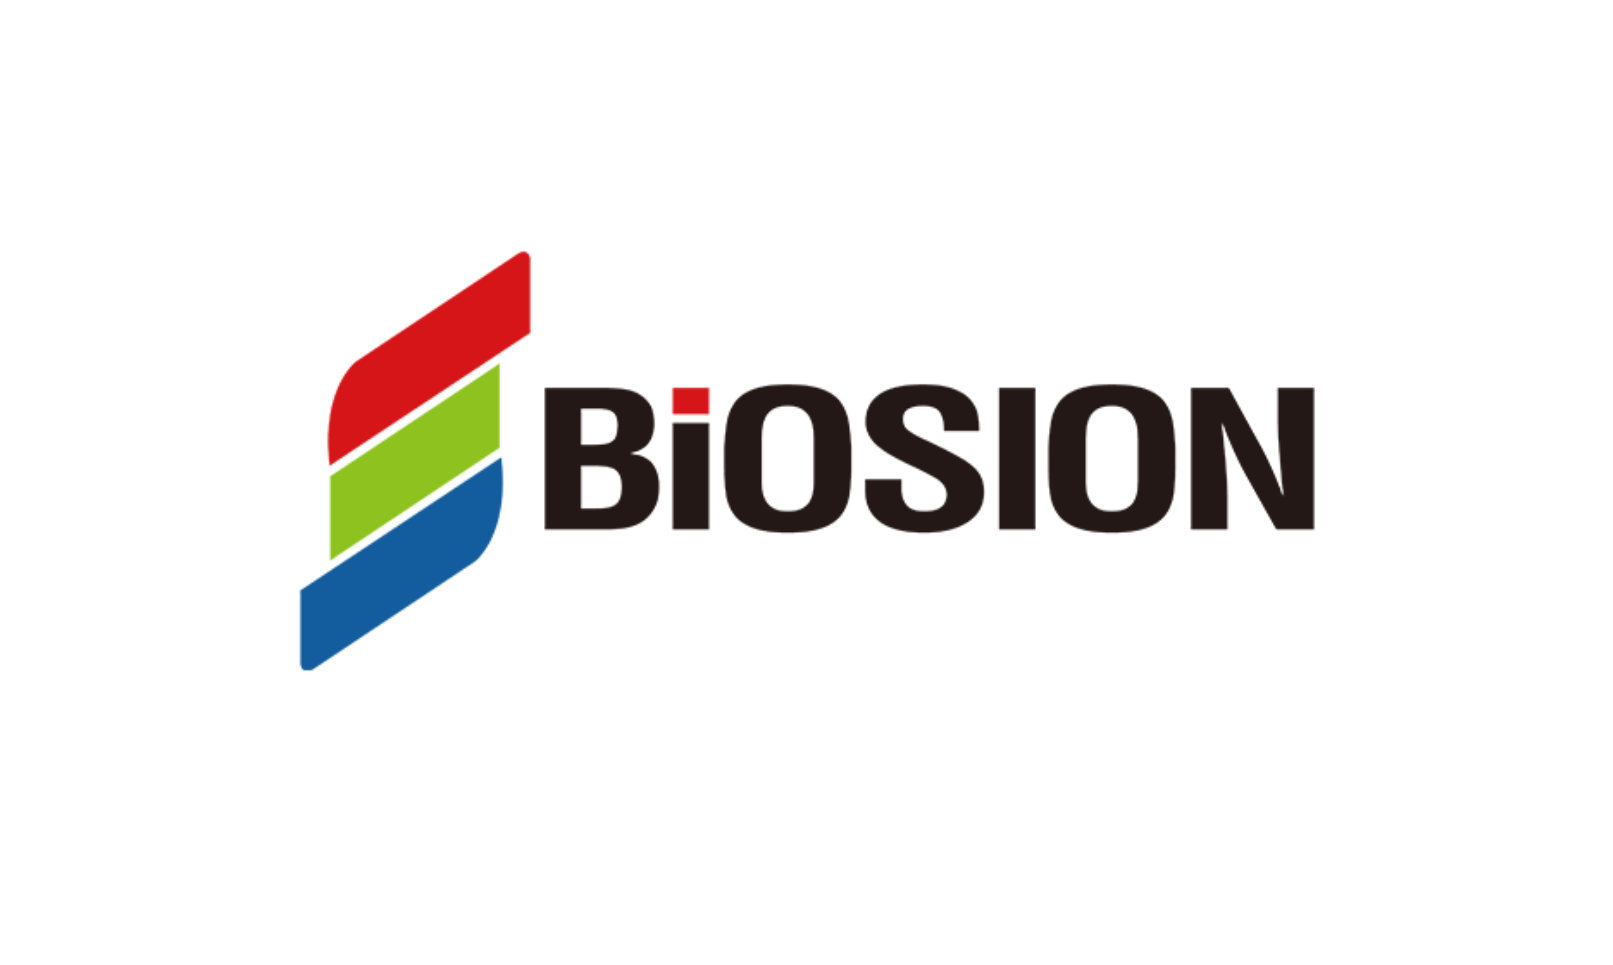 Biosion’s Partner Celldex Therapeutics Announces First Patient Dosed in Phase 1 Study of CDX-585 in Patients with Advanced Malignancies